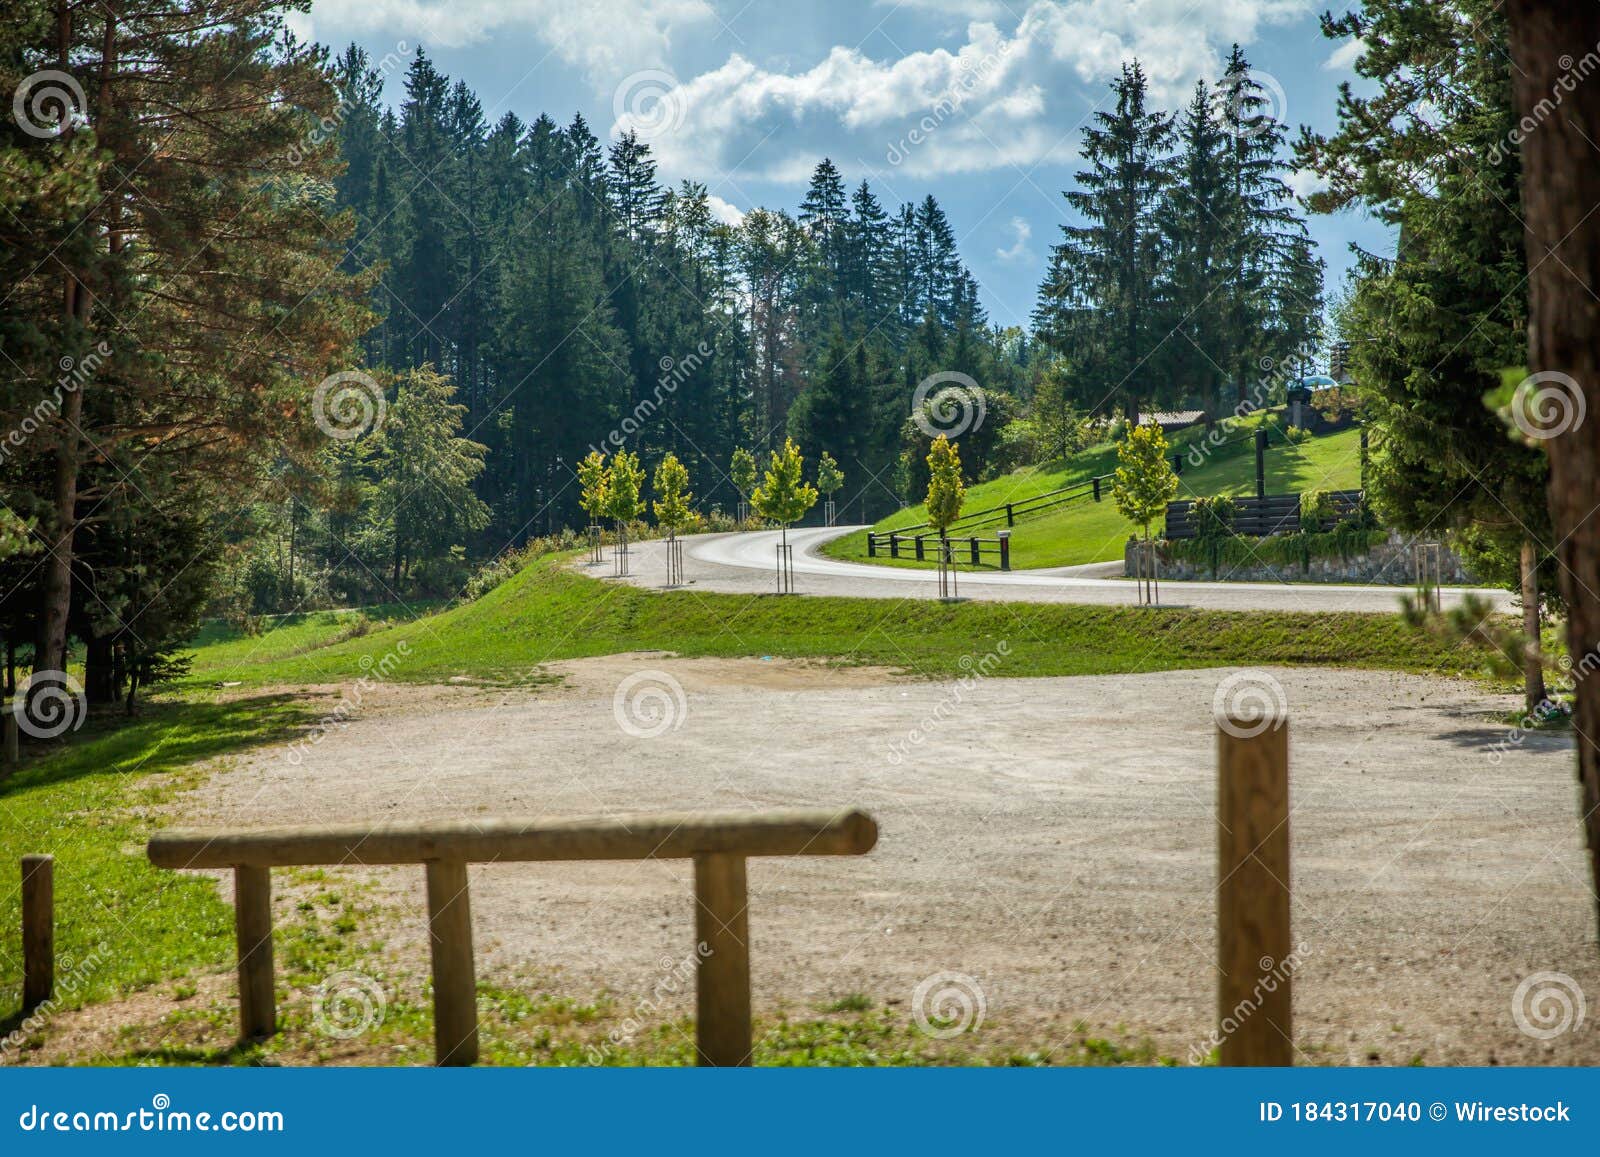 view of curved road surrounded by trees at hija glamping site at nova vas in slovenia on a sunny day